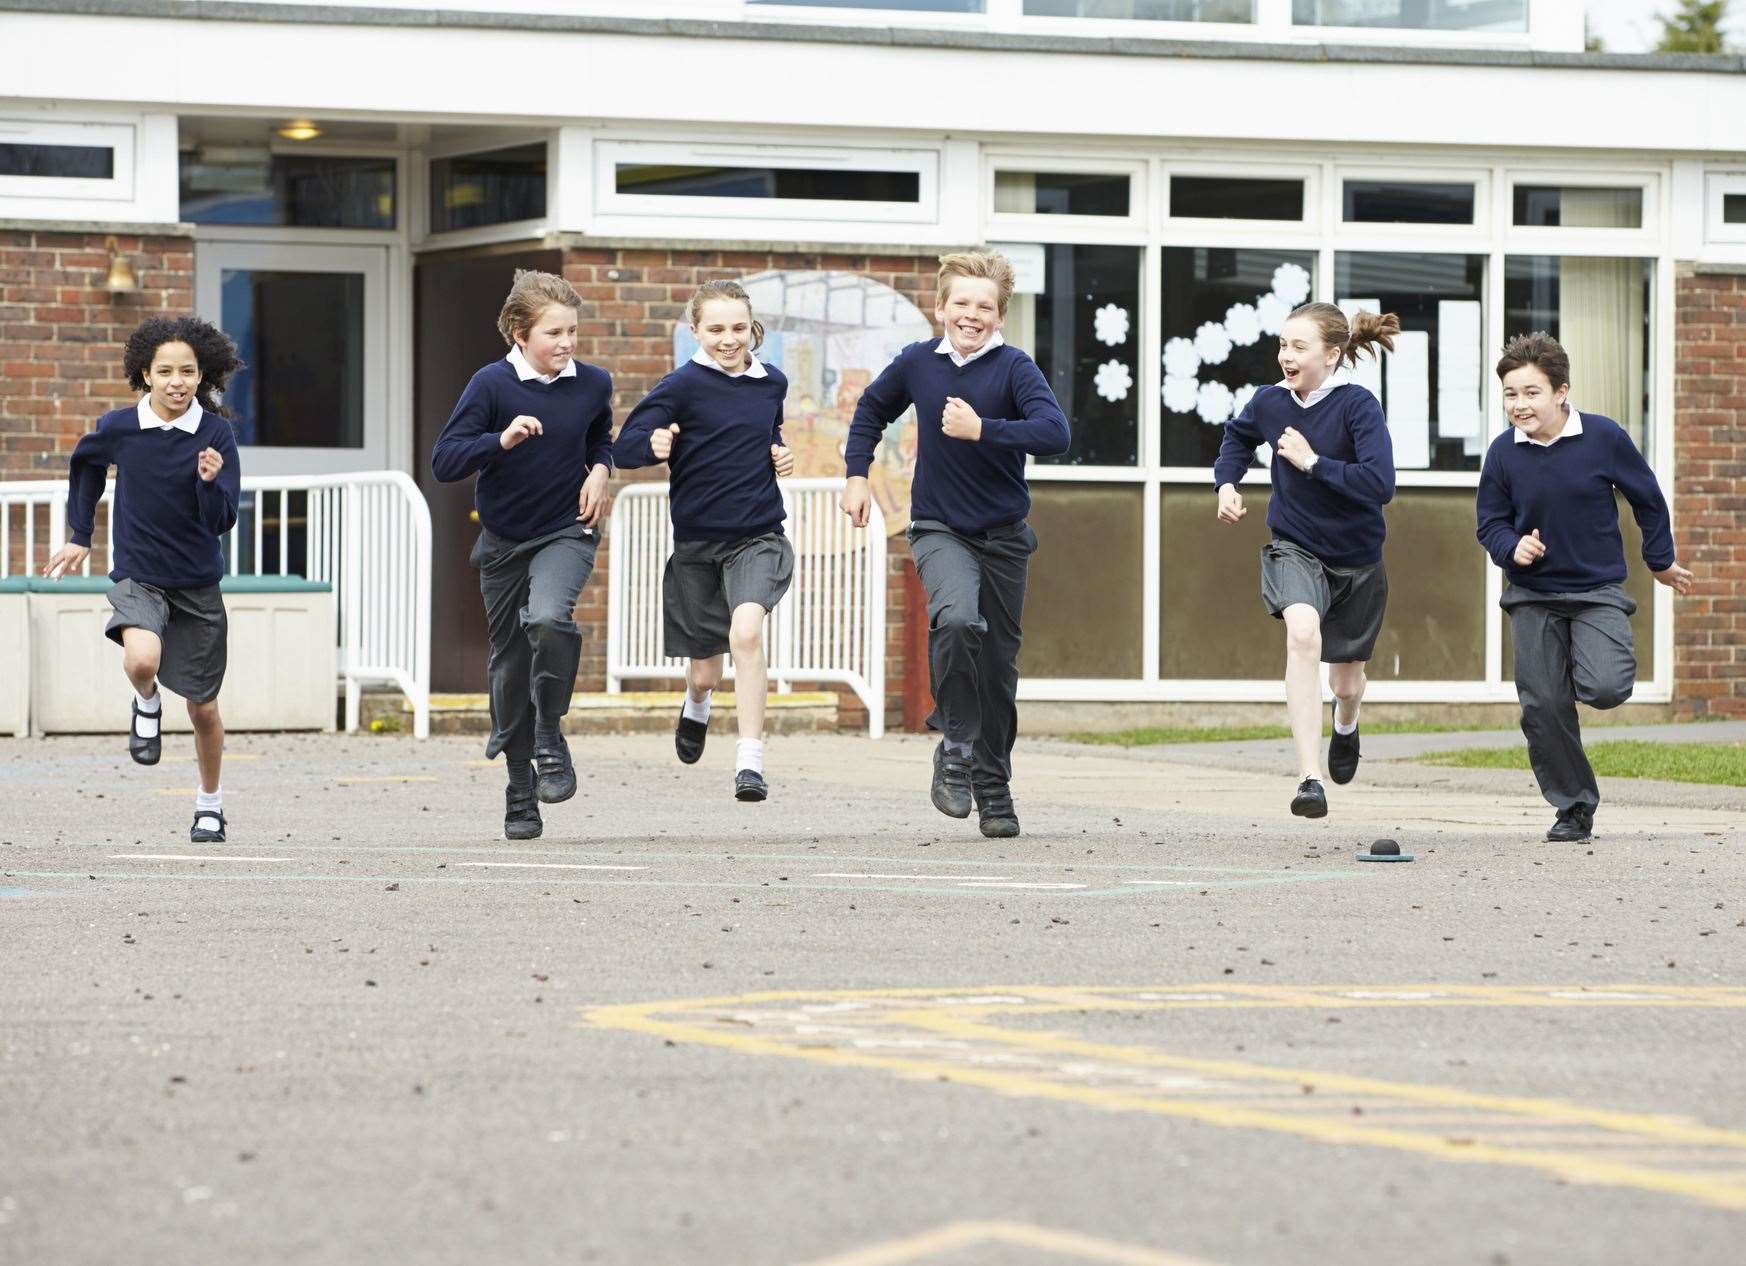 With pupils heading back to school this week, what do you remember most about your own school days?